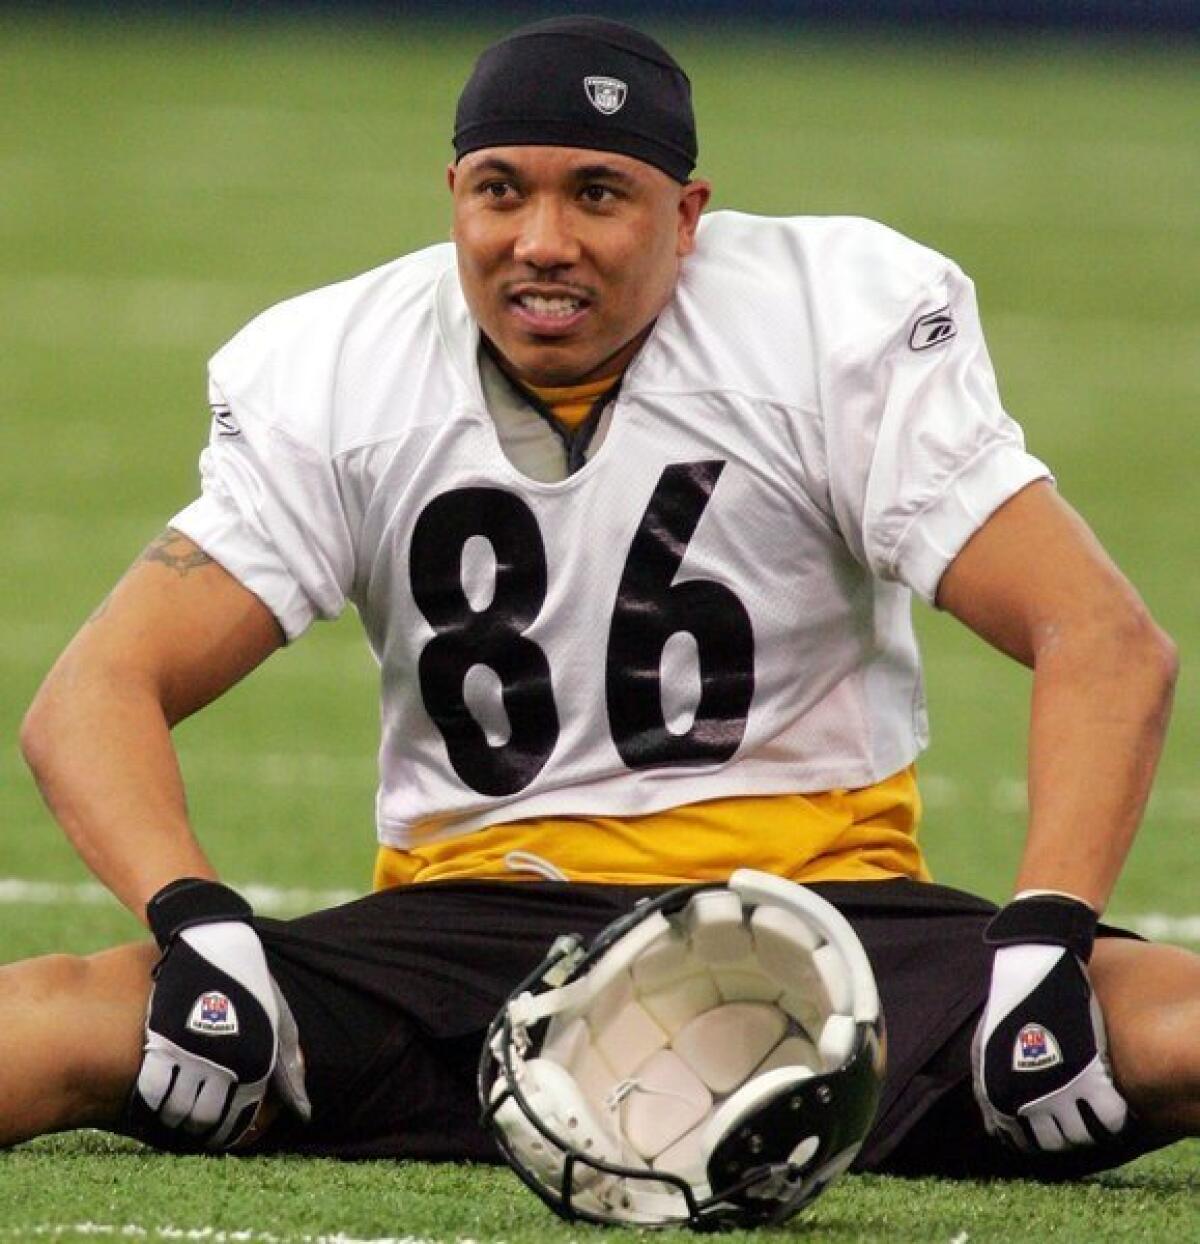 Hines Ward trades the football field for the Food Network show "Rachel vs. Guy: Celebrity Cook-Off."